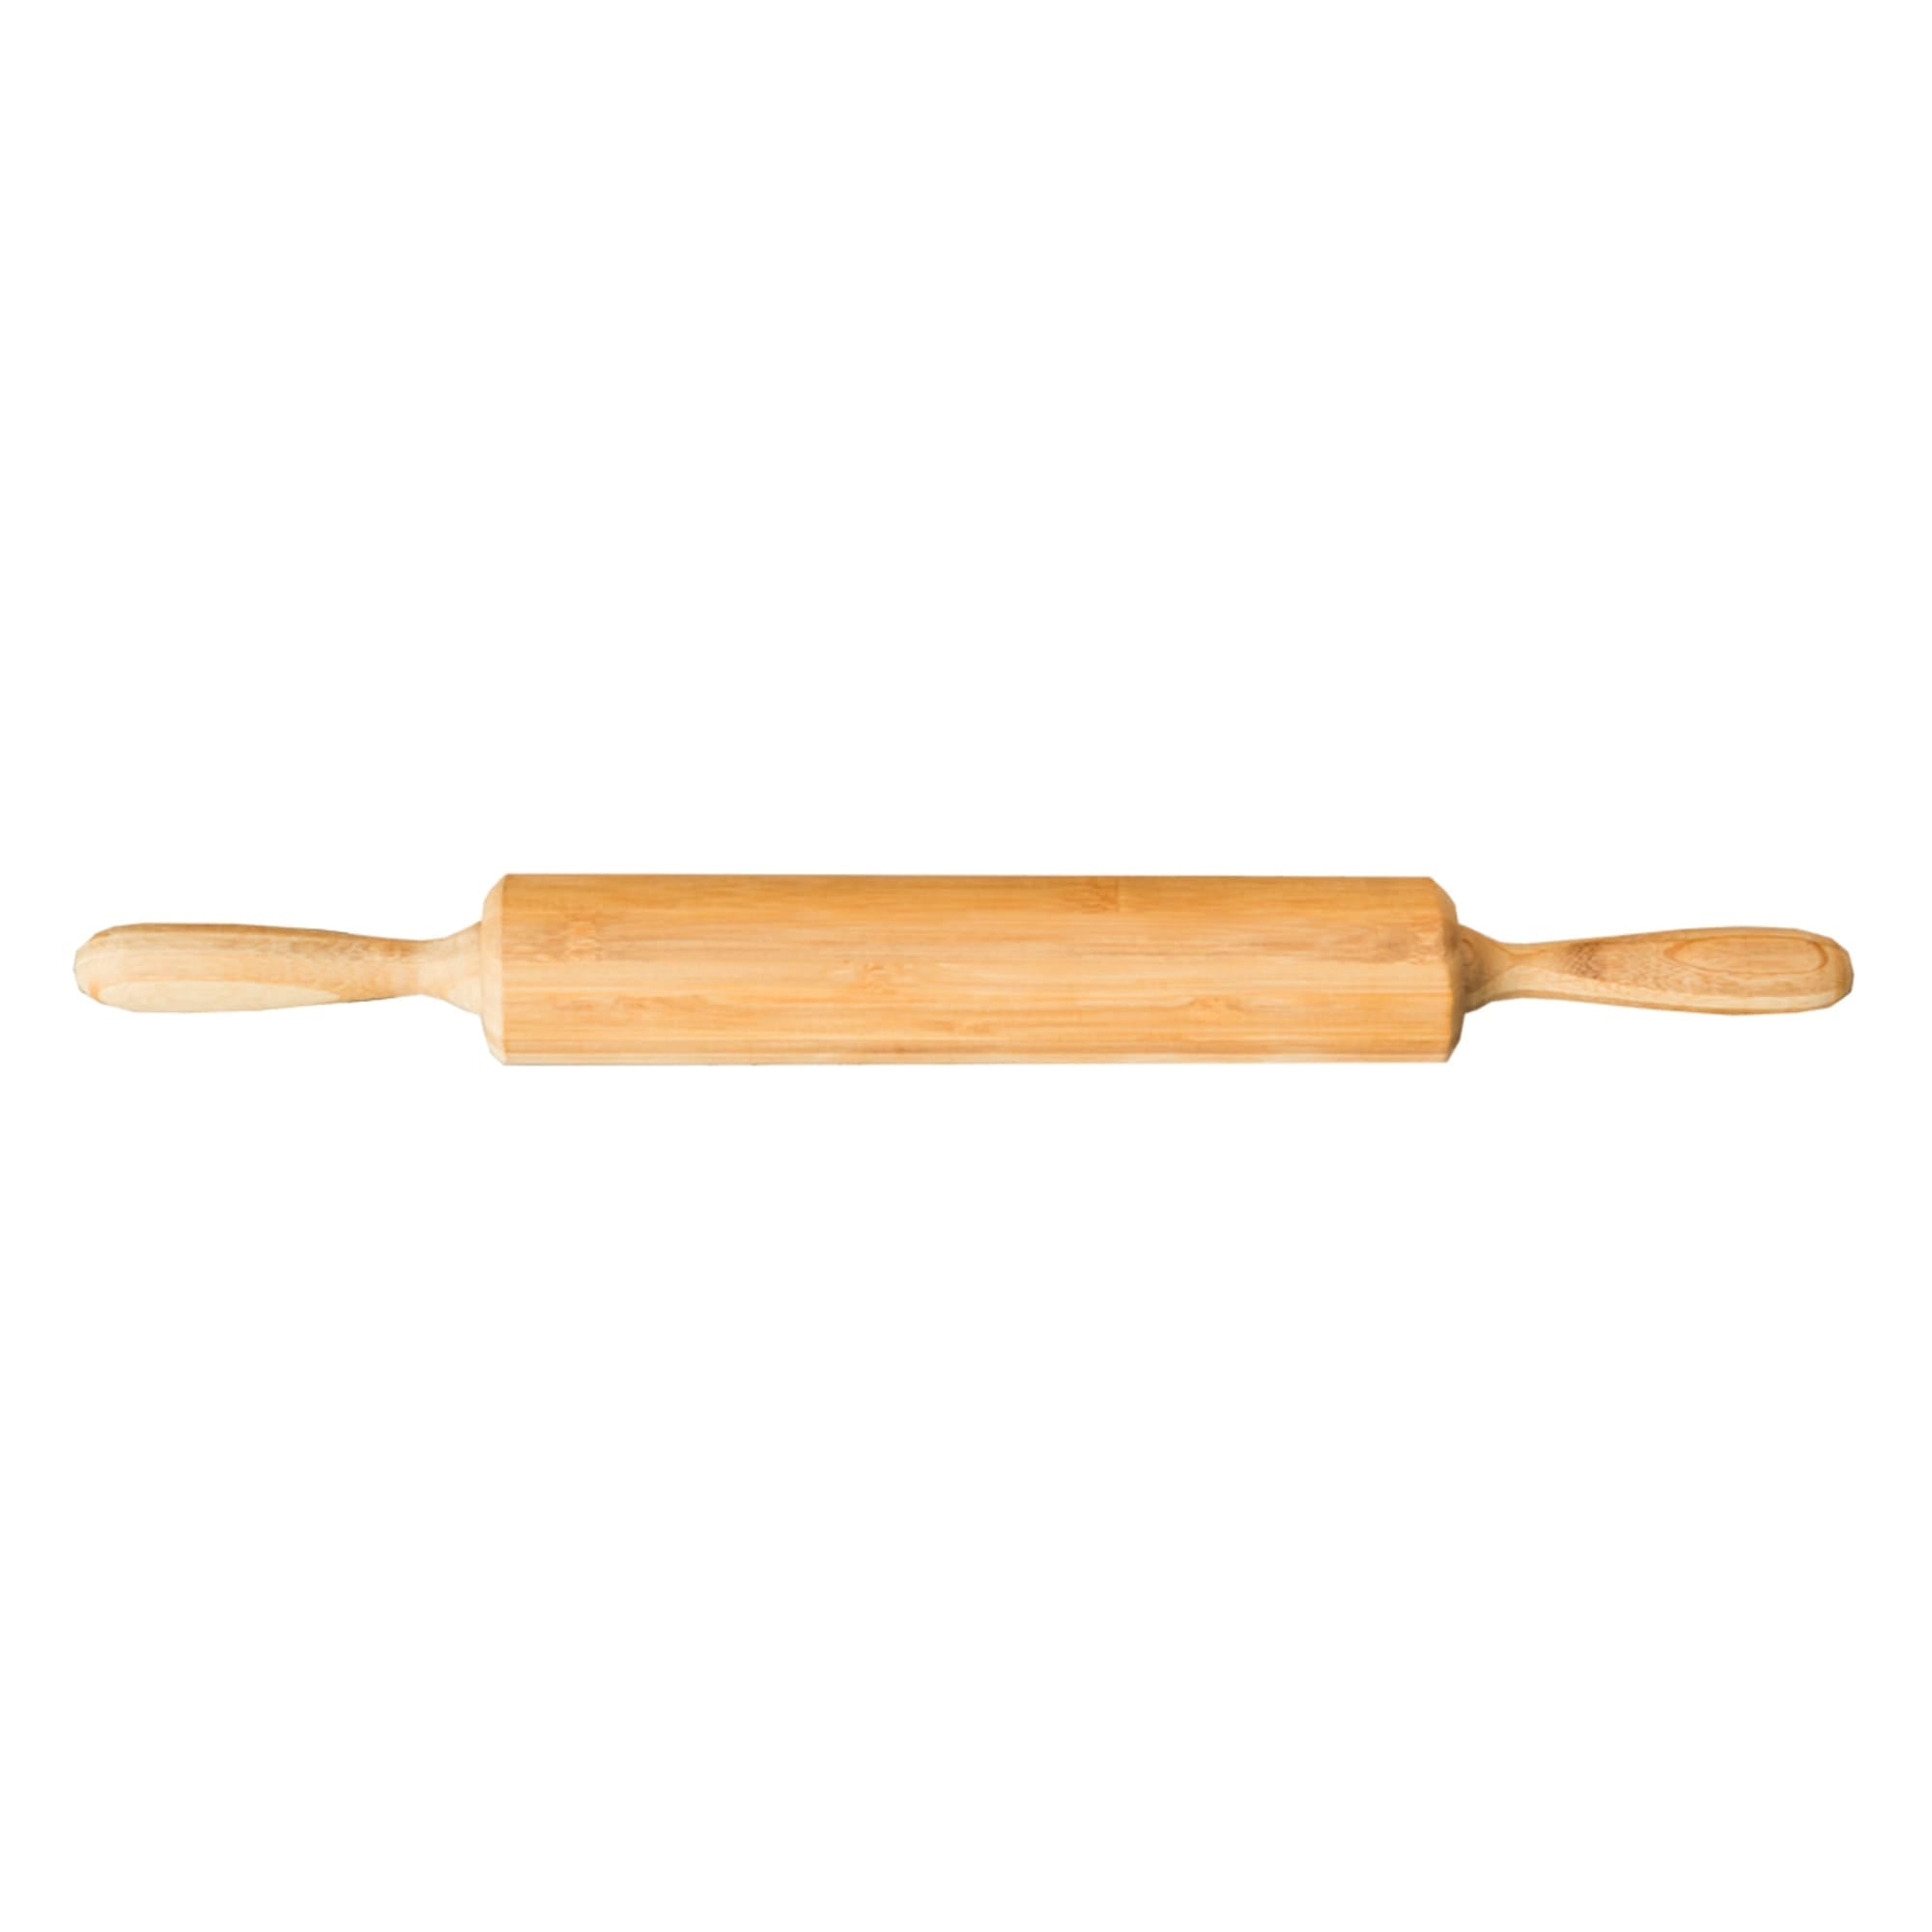 Home Basics Bamboo Rolling Pin $5.00 EACH, CASE PACK OF 12